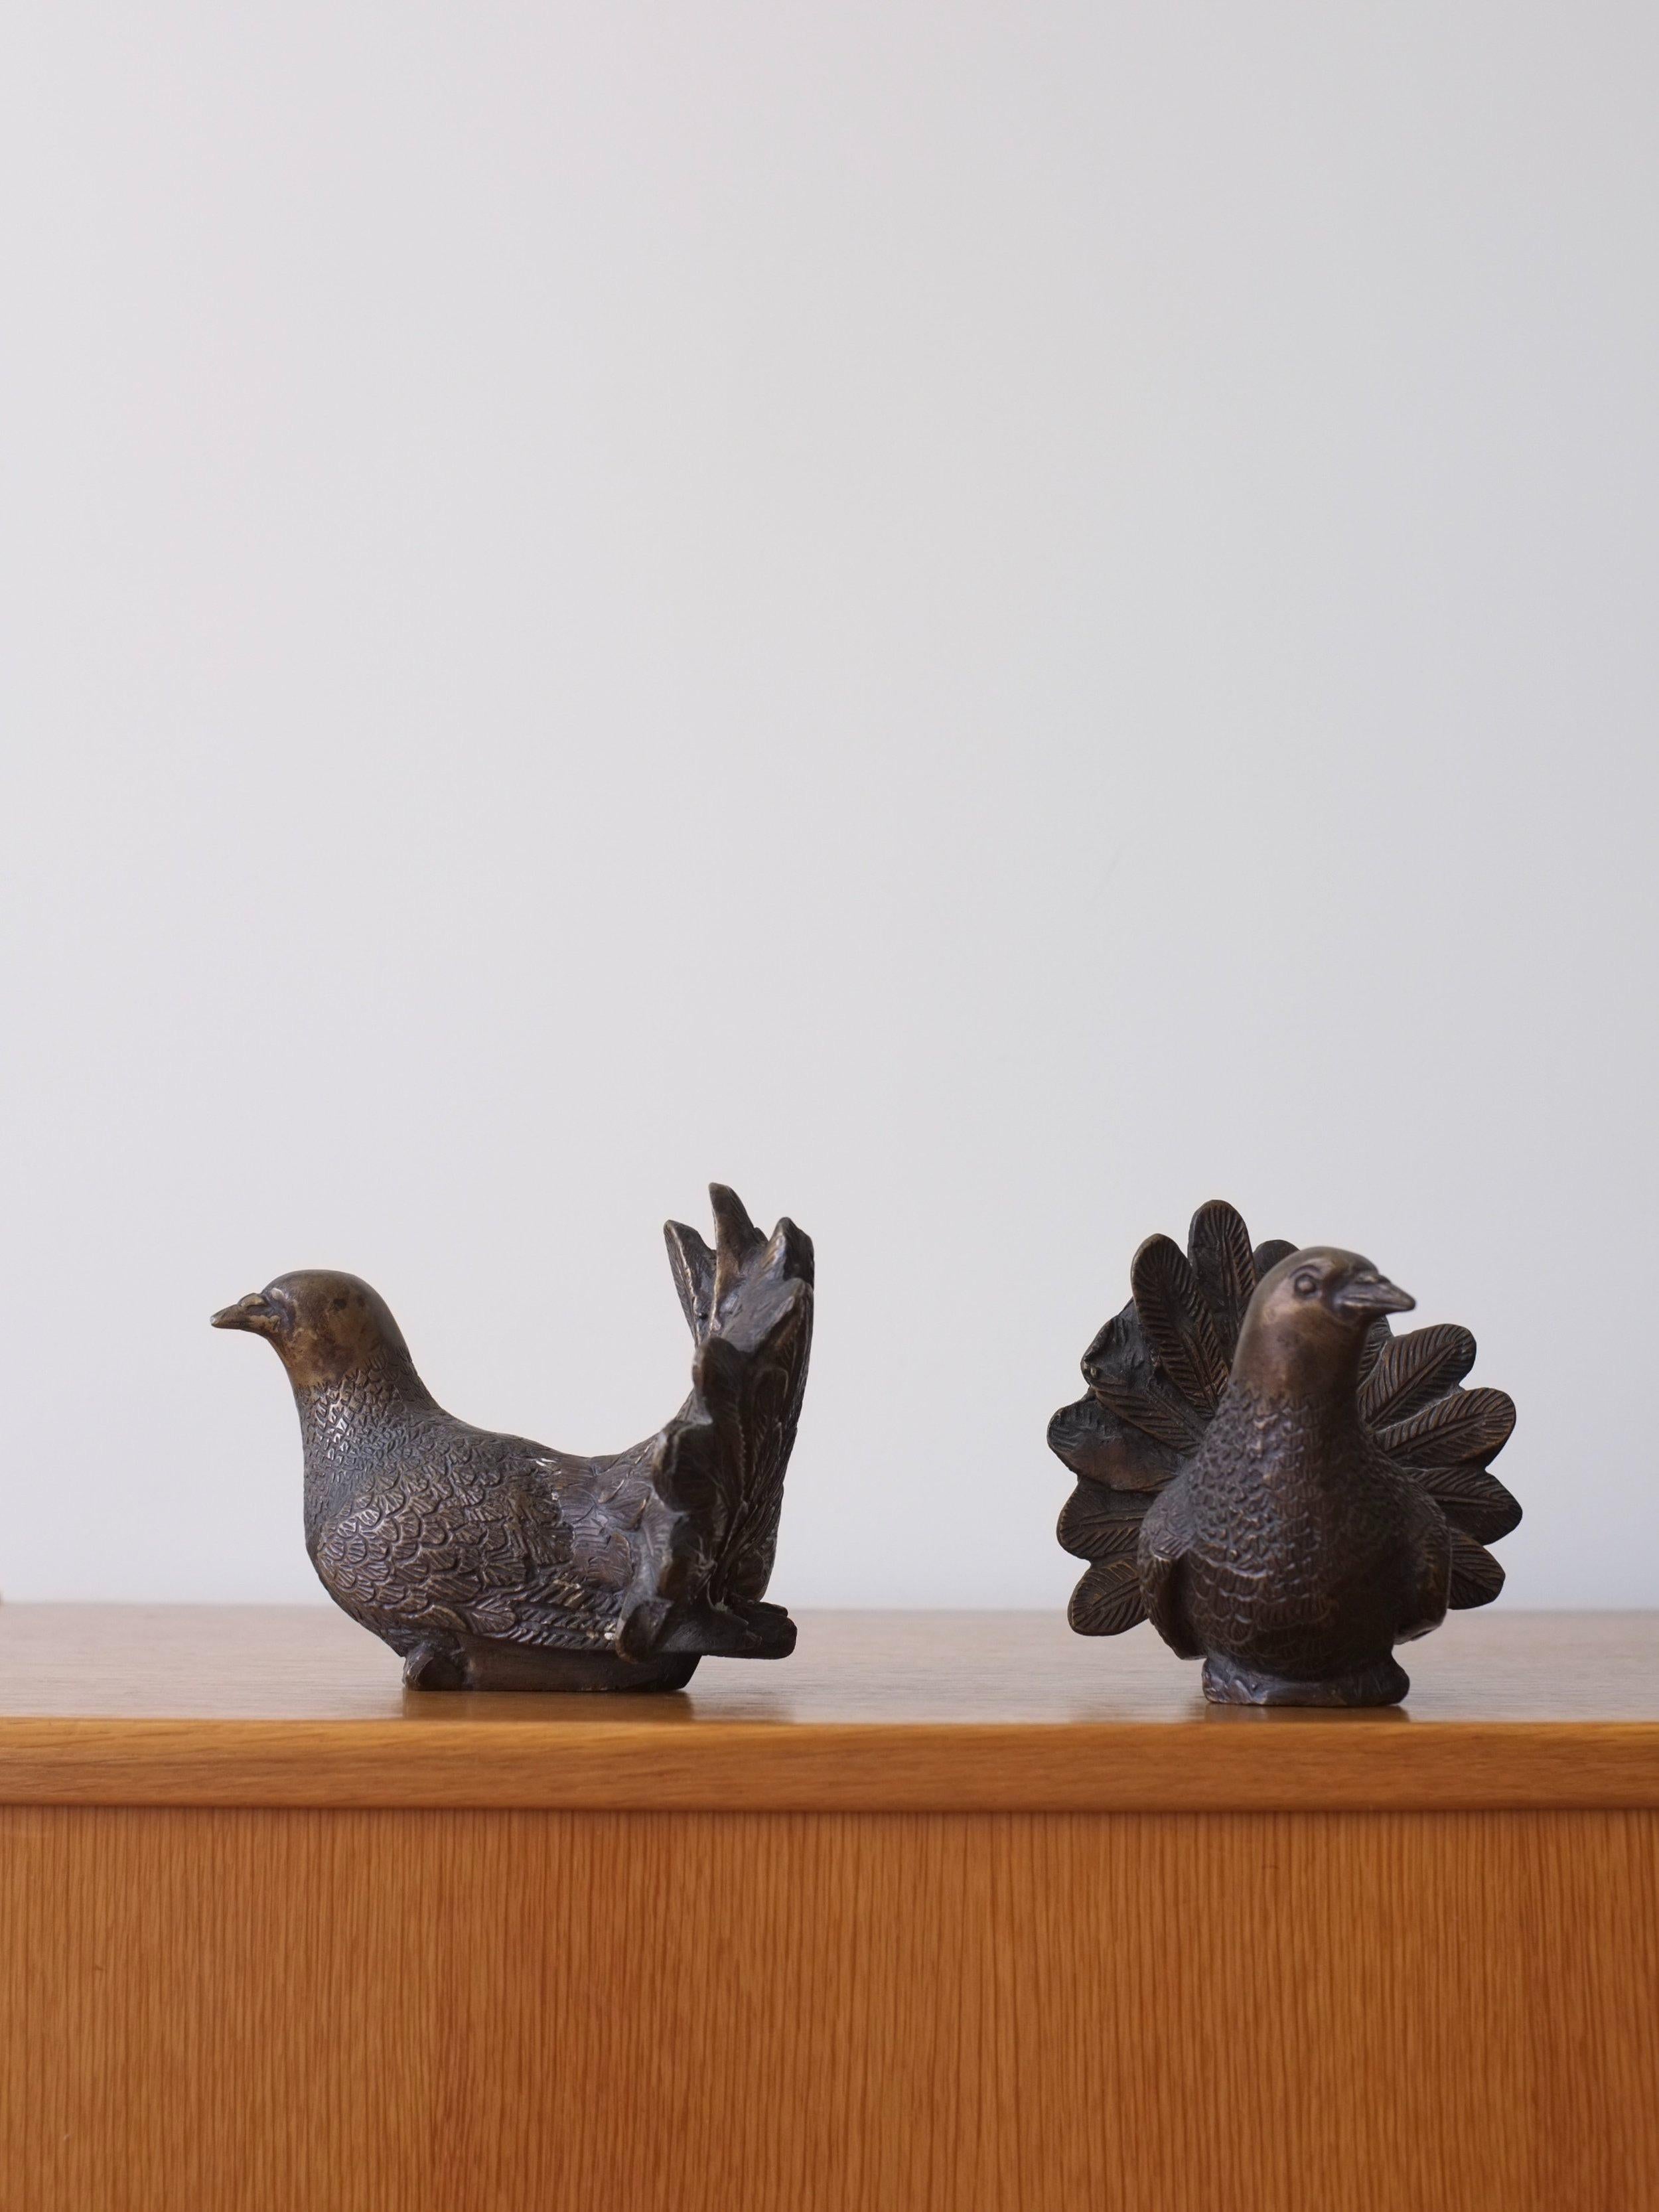 Set of 2 vintage bronze pigeons, paperweight. Heavy - 2.3 kg total.

Additional information:
Country of manufacture:  Bought in France
Design/Manufacture period: 20th century
Dimensions: 12 W x 15 D x 11.5 H cm
Condition: Good vintage condition with